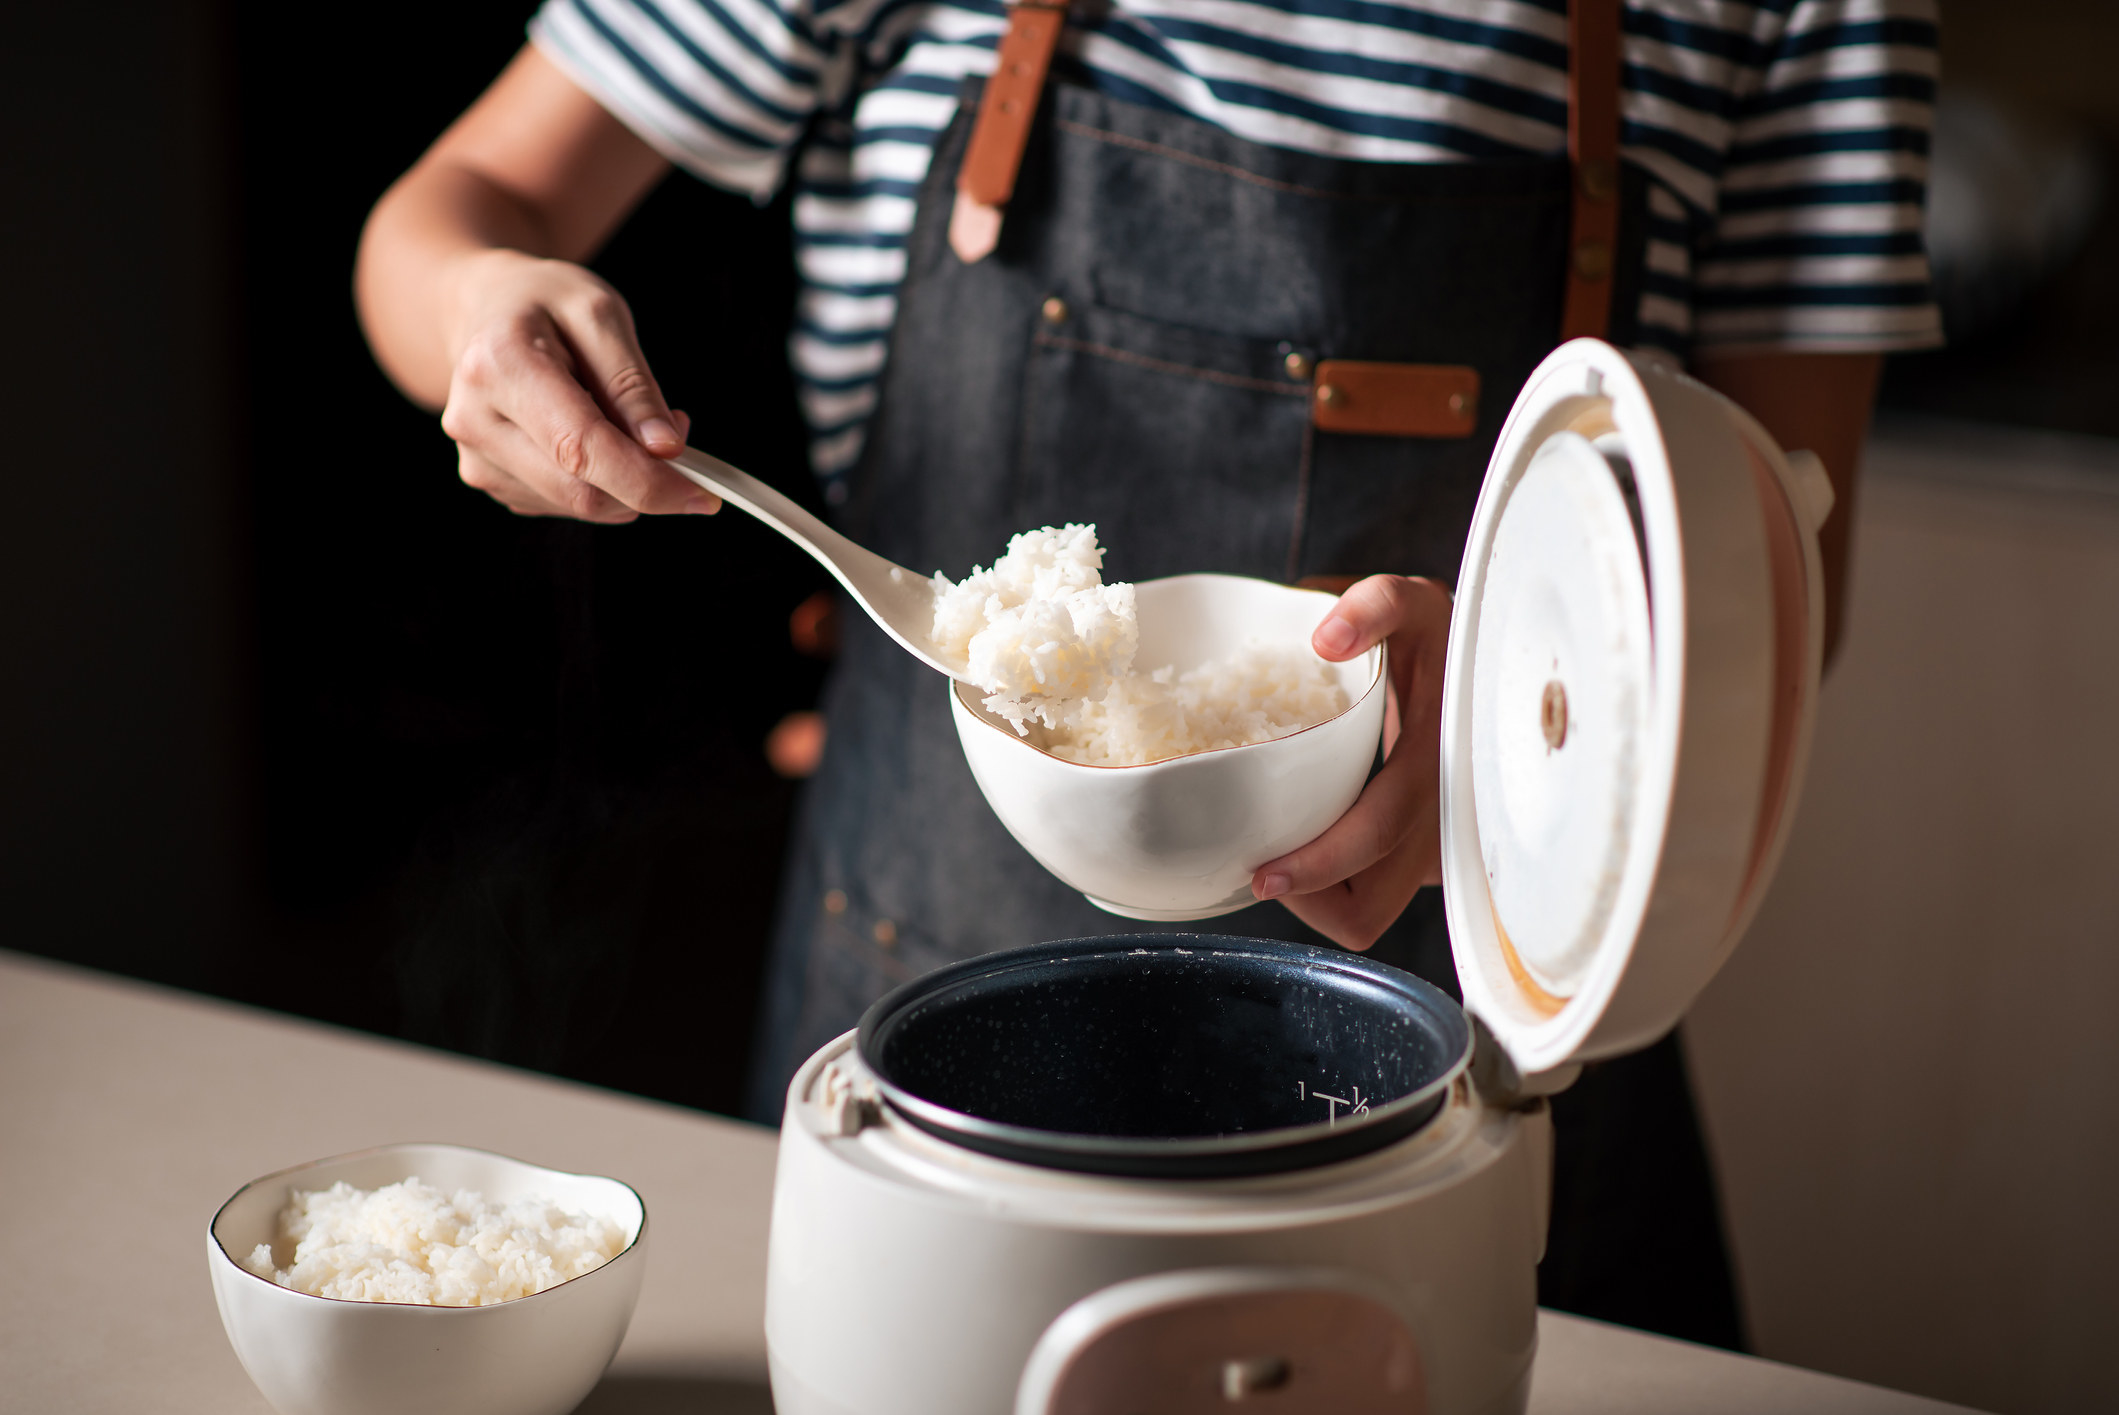 A person putting rice from a rice cooker into a bowl